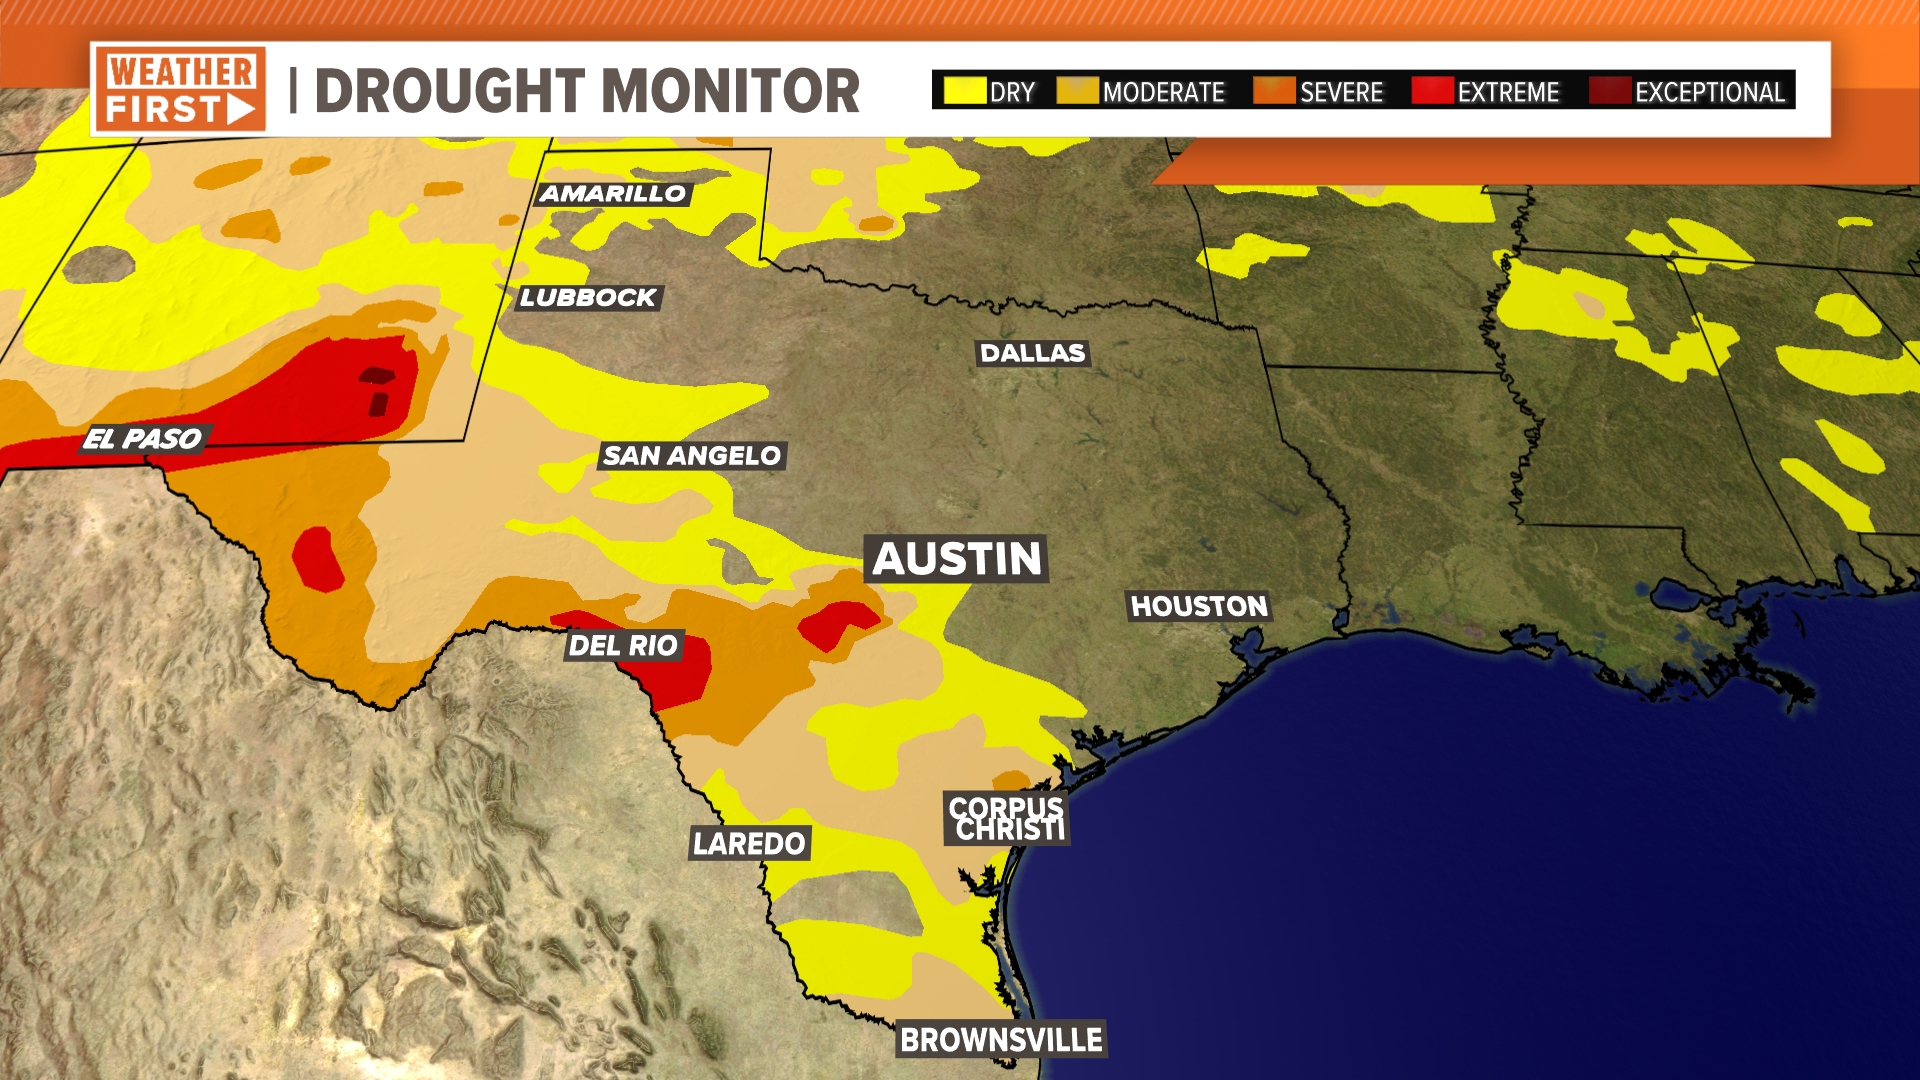 Not much change happened from last week's drought monitor but changes are coming for next week